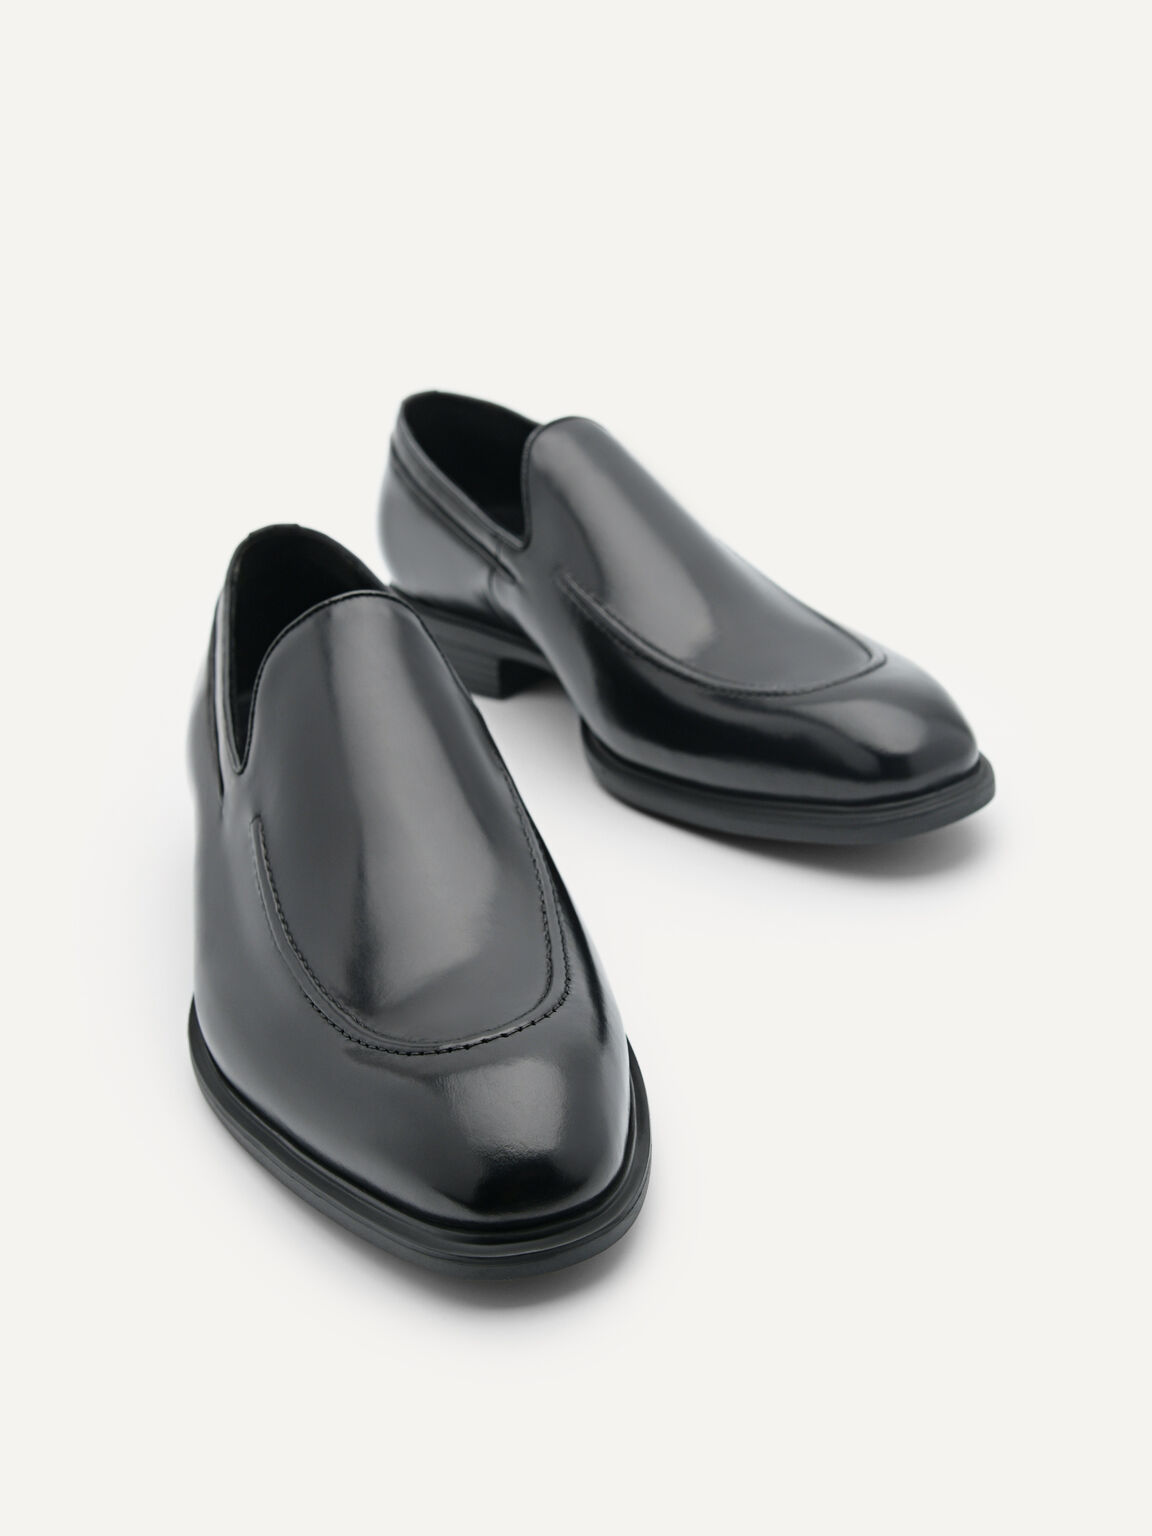 Altitude Lightweight Leather Loafers, Black